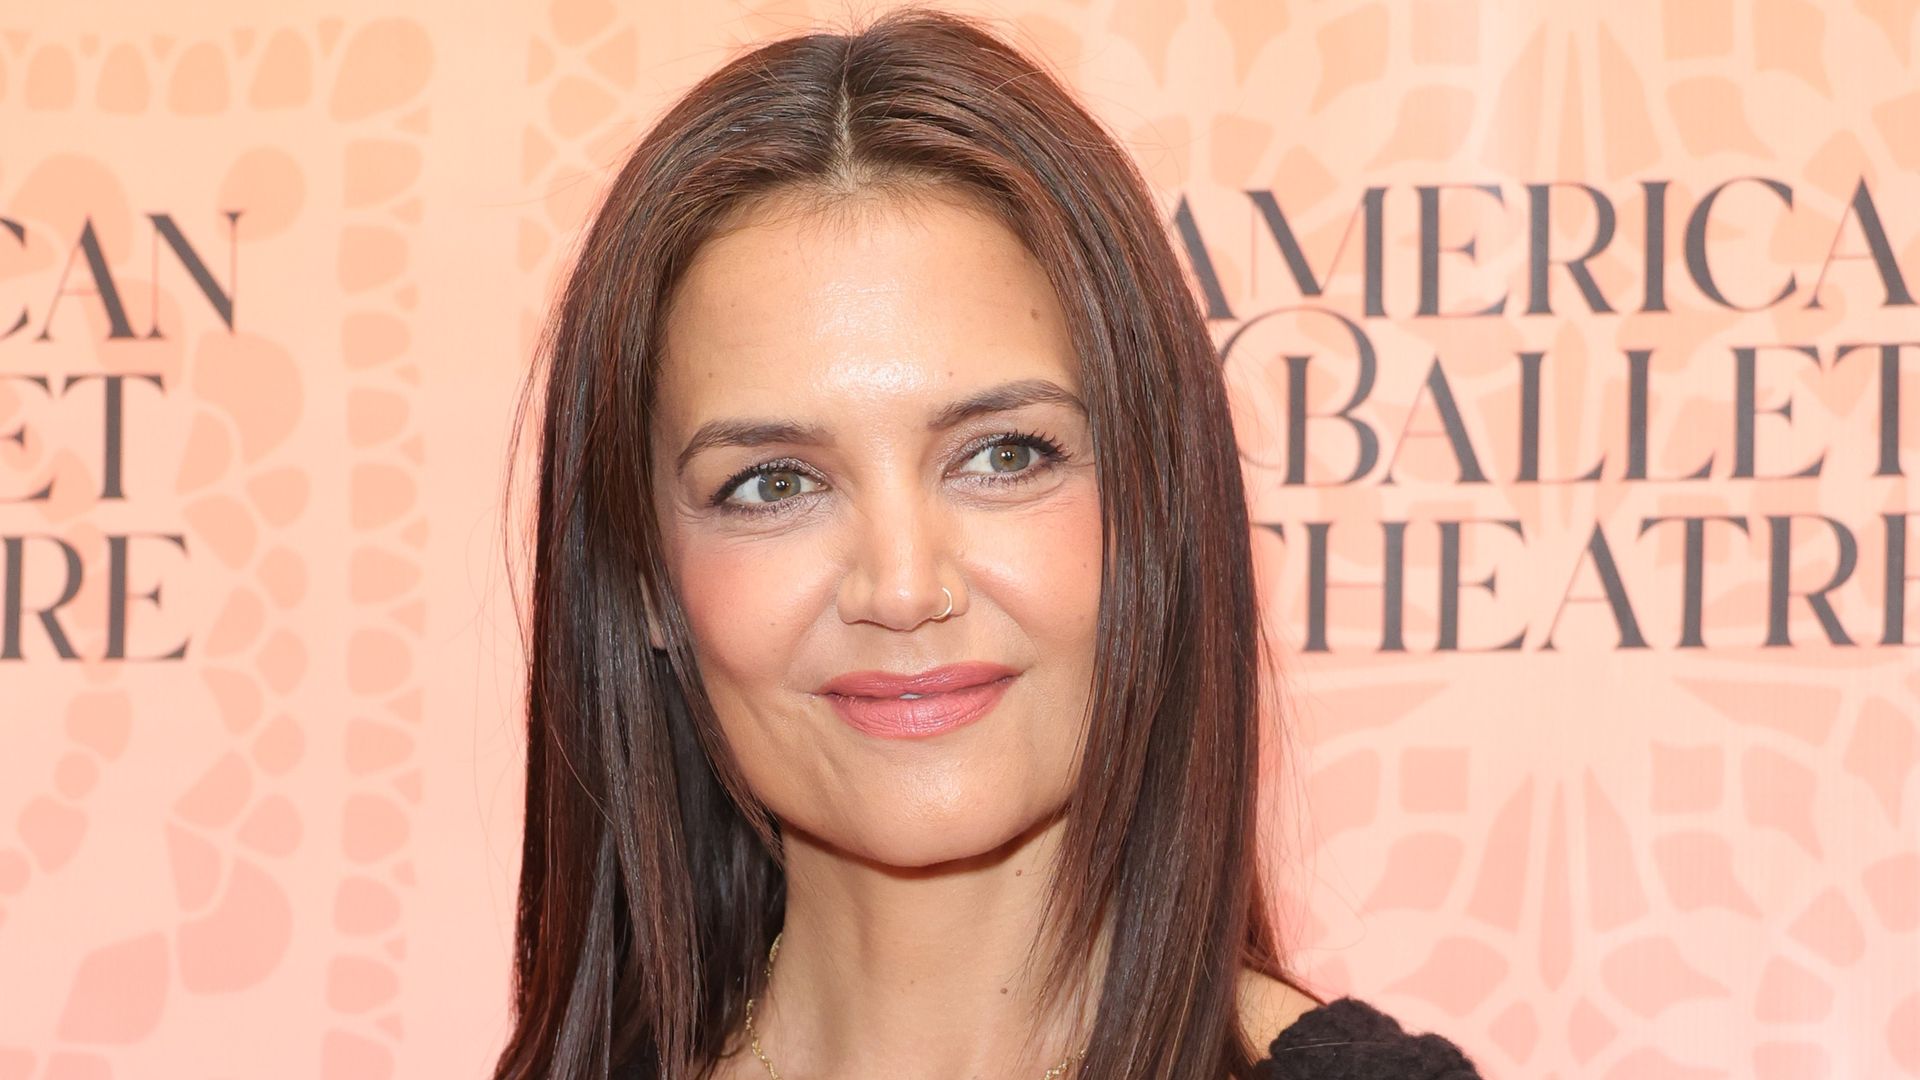  Katie Holmes attends the 2023 American Ballet Theatre's summer season opening night performance of "Like Water For Chocolate" at The Metropolitan Opera House on June 22, 2023 in New York City. (Photo by Michael Loccisano/Getty Images)